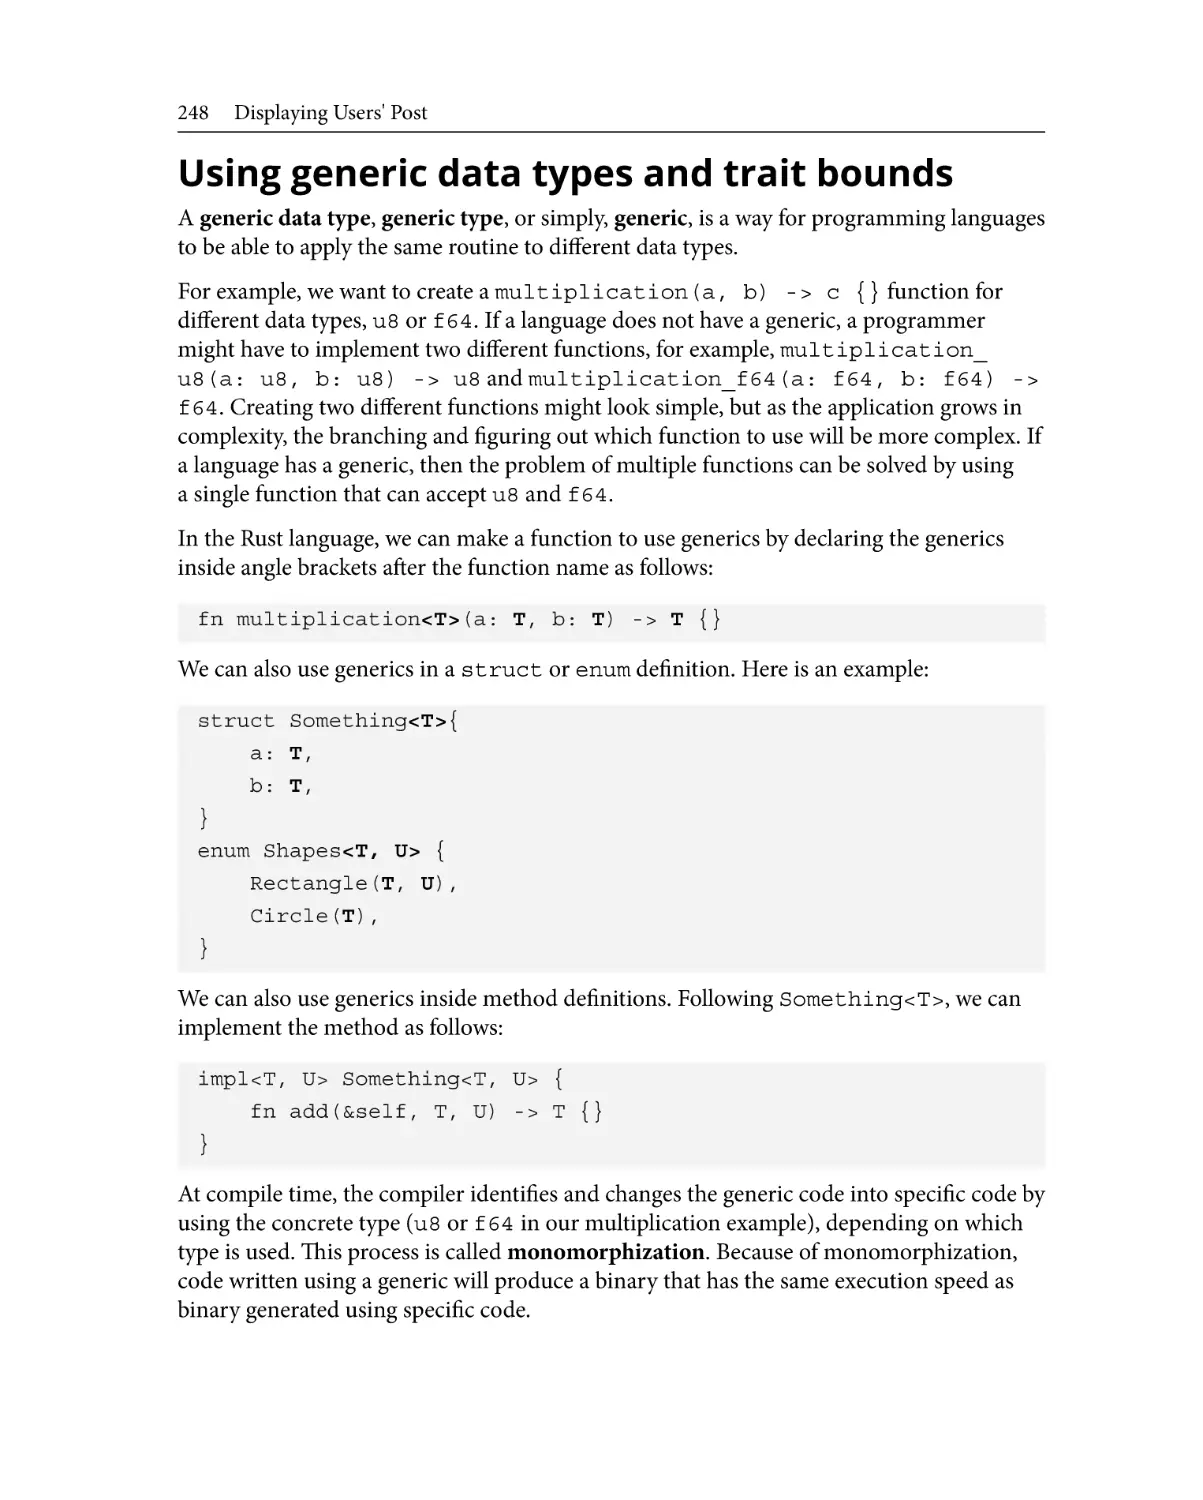 Using generic data types and trait bounds